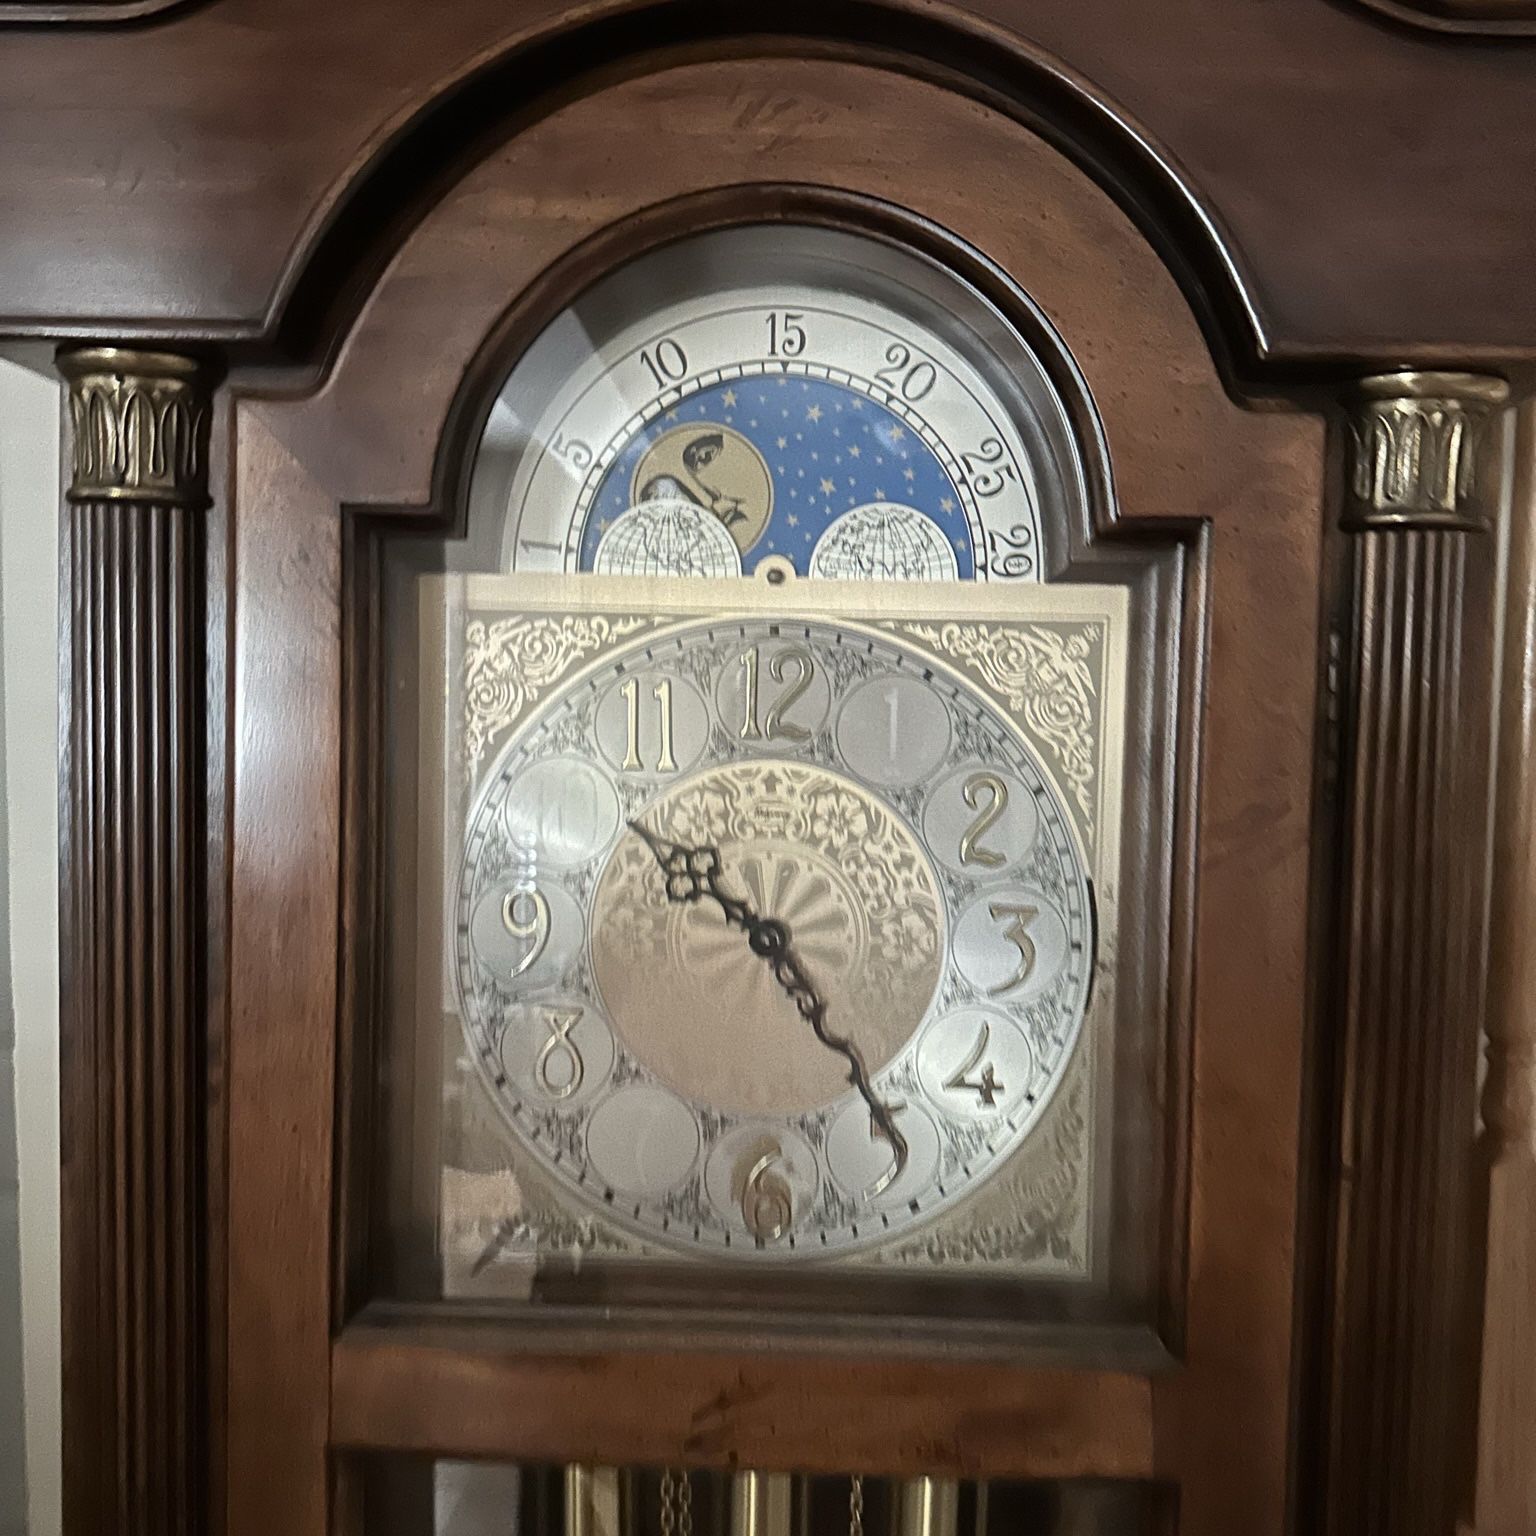 $190 If Can Come This Weekend Ridgeway Grandfather  Clock  Moon  Sun  Model W2 205 Cherry Finish Movement 